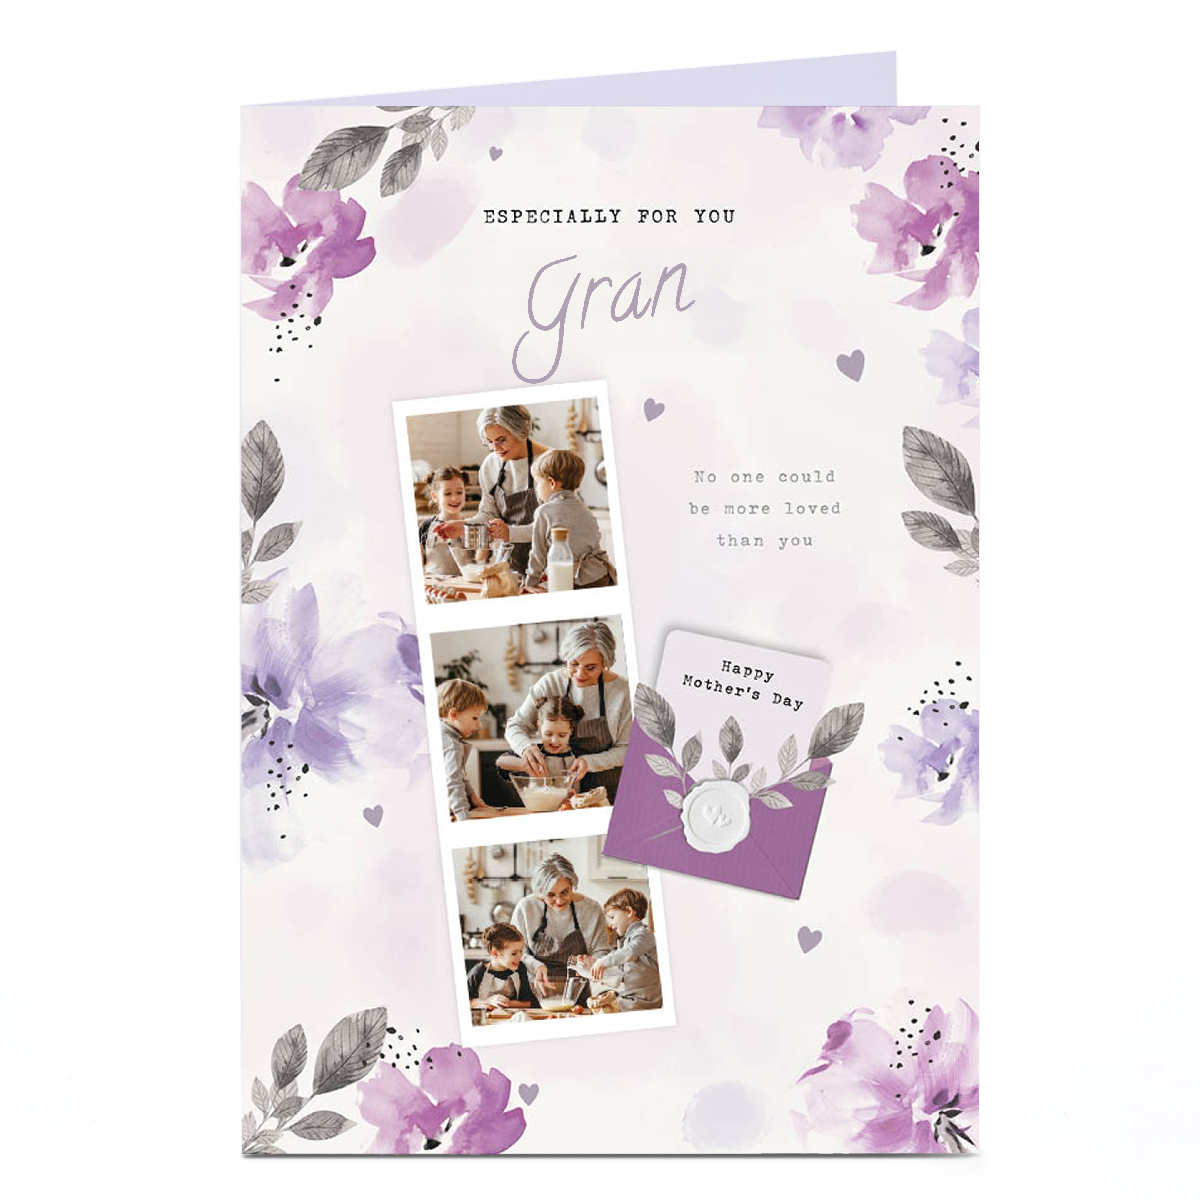 Personalised Mother's Day Card - 3 photos with lilac flowers - Gran